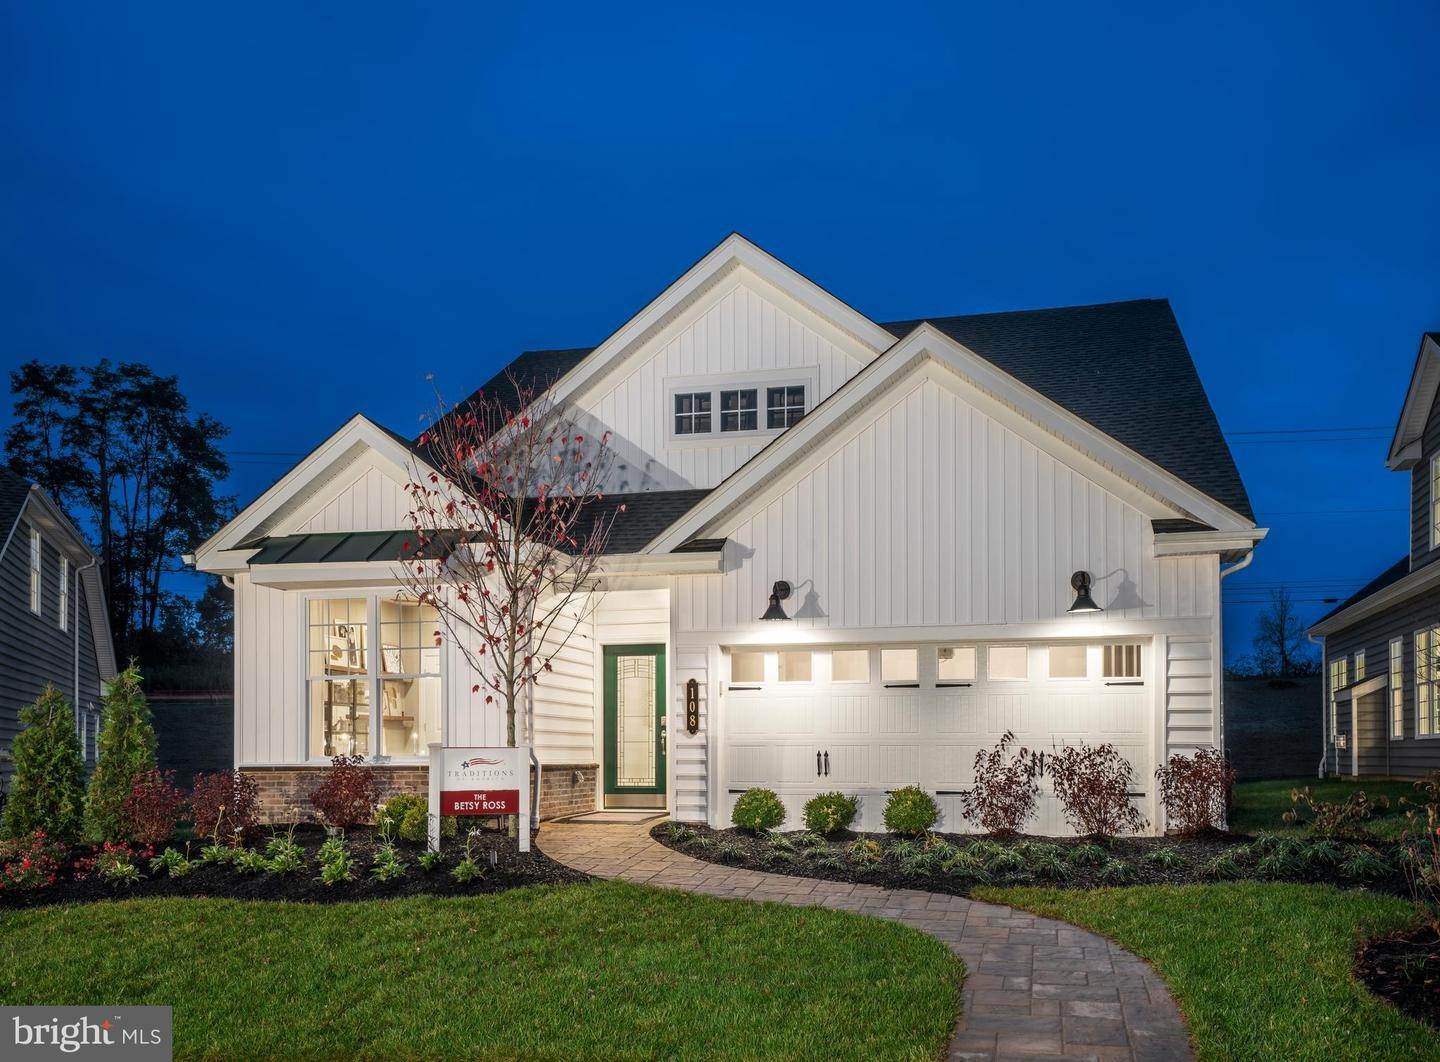 Residential for Sale at TRADITIONS DR #BETSY ROSS MODEL Coopersburg, Pennsylvania 18036 United States